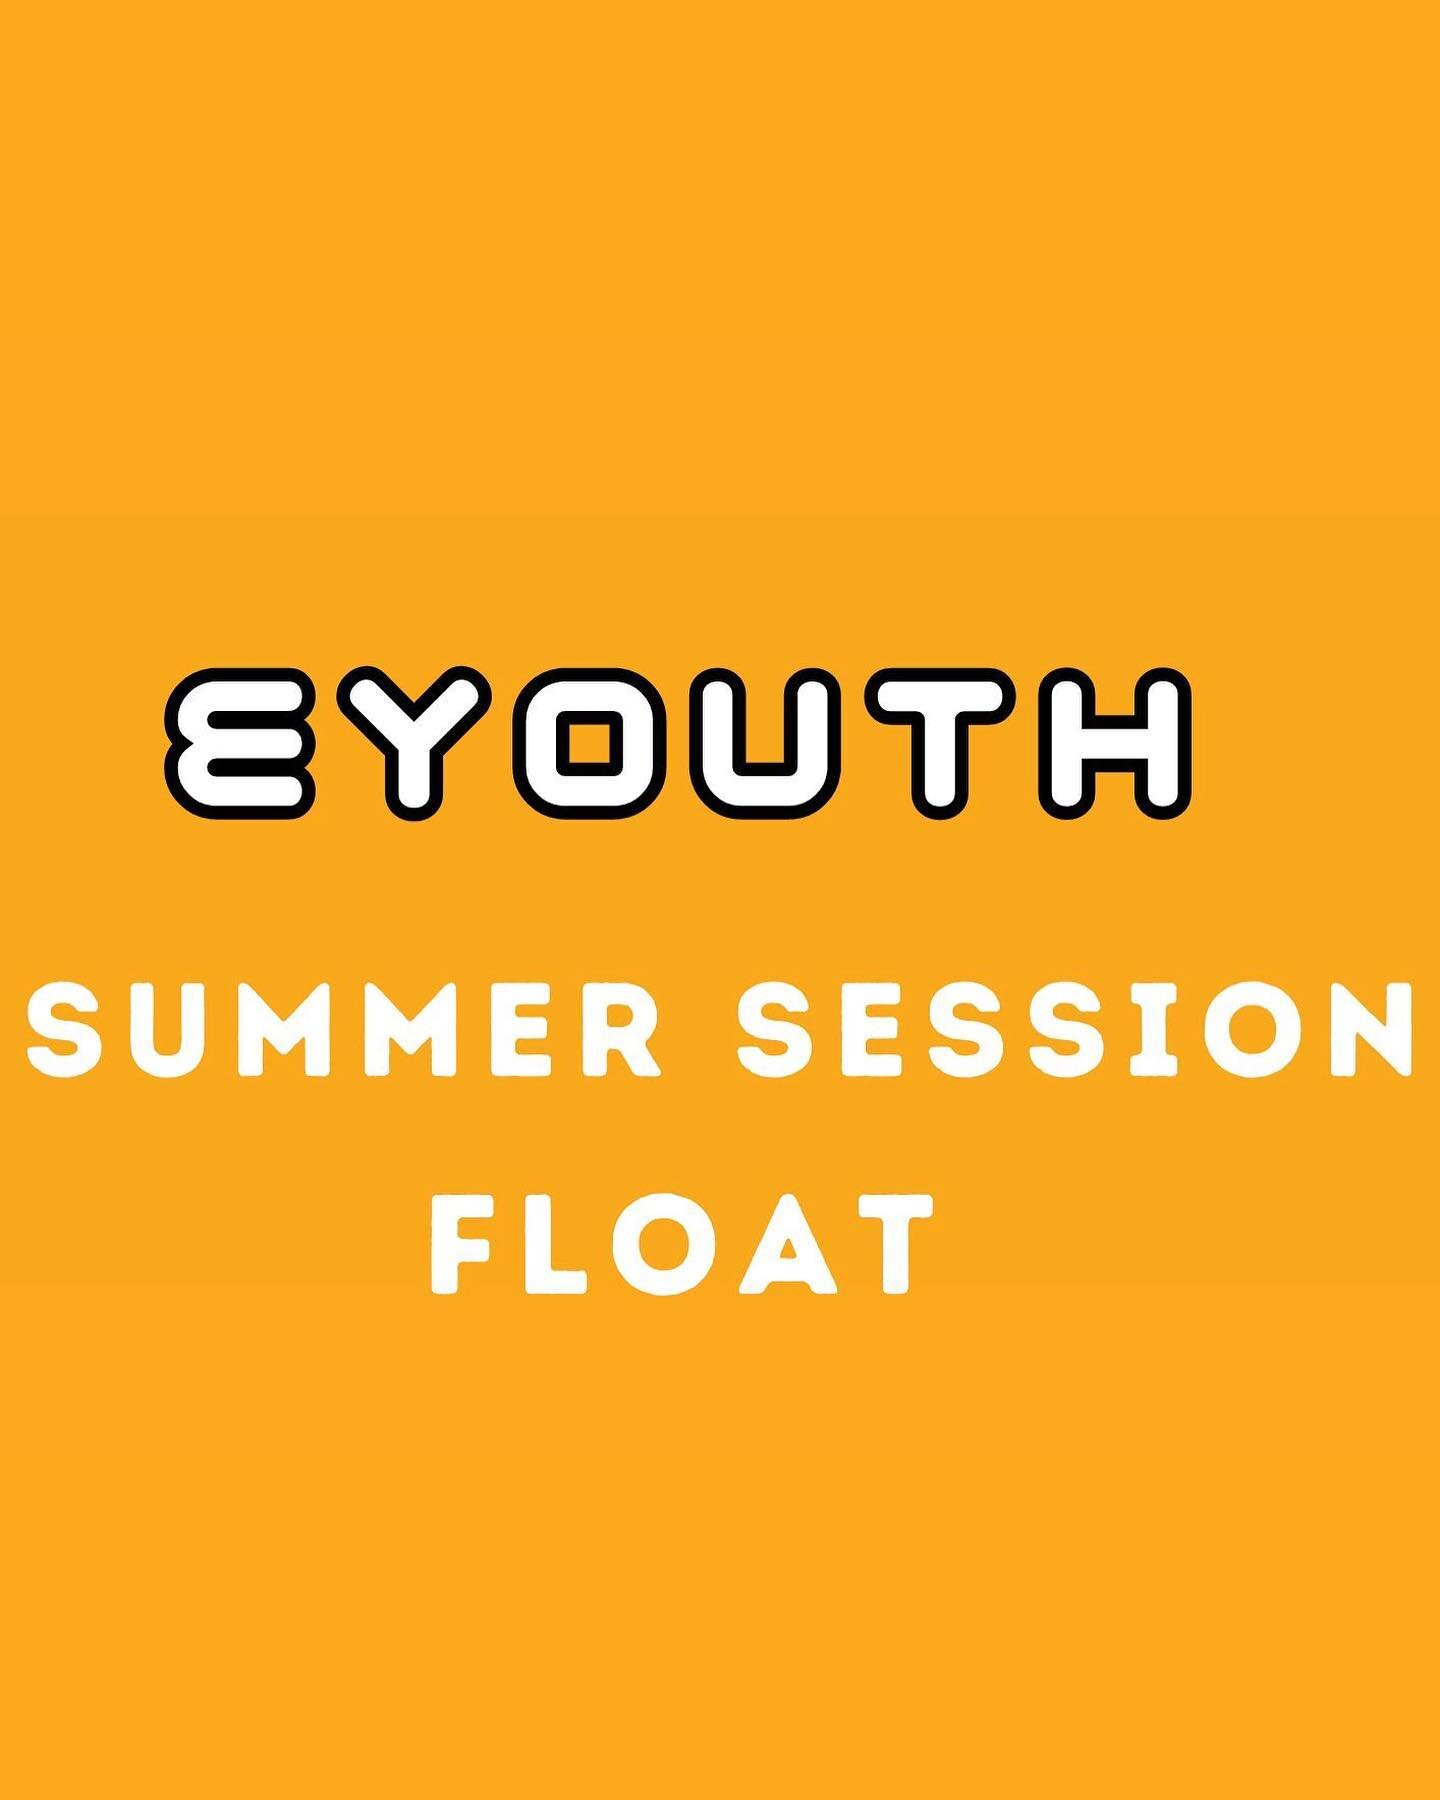 STITCH UP, SWITCH UP 👊👊

LAST SUMMER SESSION ON FRIDAY ☀️☀️ 

FEED AT THE CHURCH 🌭🌭 //FLOATING DOWN DARTMOOR RIVER 🛟🛟🛶🛶// WHAT ELSE COULD YOU ASK FOR (RHETORICAL 🤡) ?? 

5PM - 8PM 

PICK UP AND DROP OFF FROM ENGAGE CHURCH ⛪️⛪️

COVERED SHOES